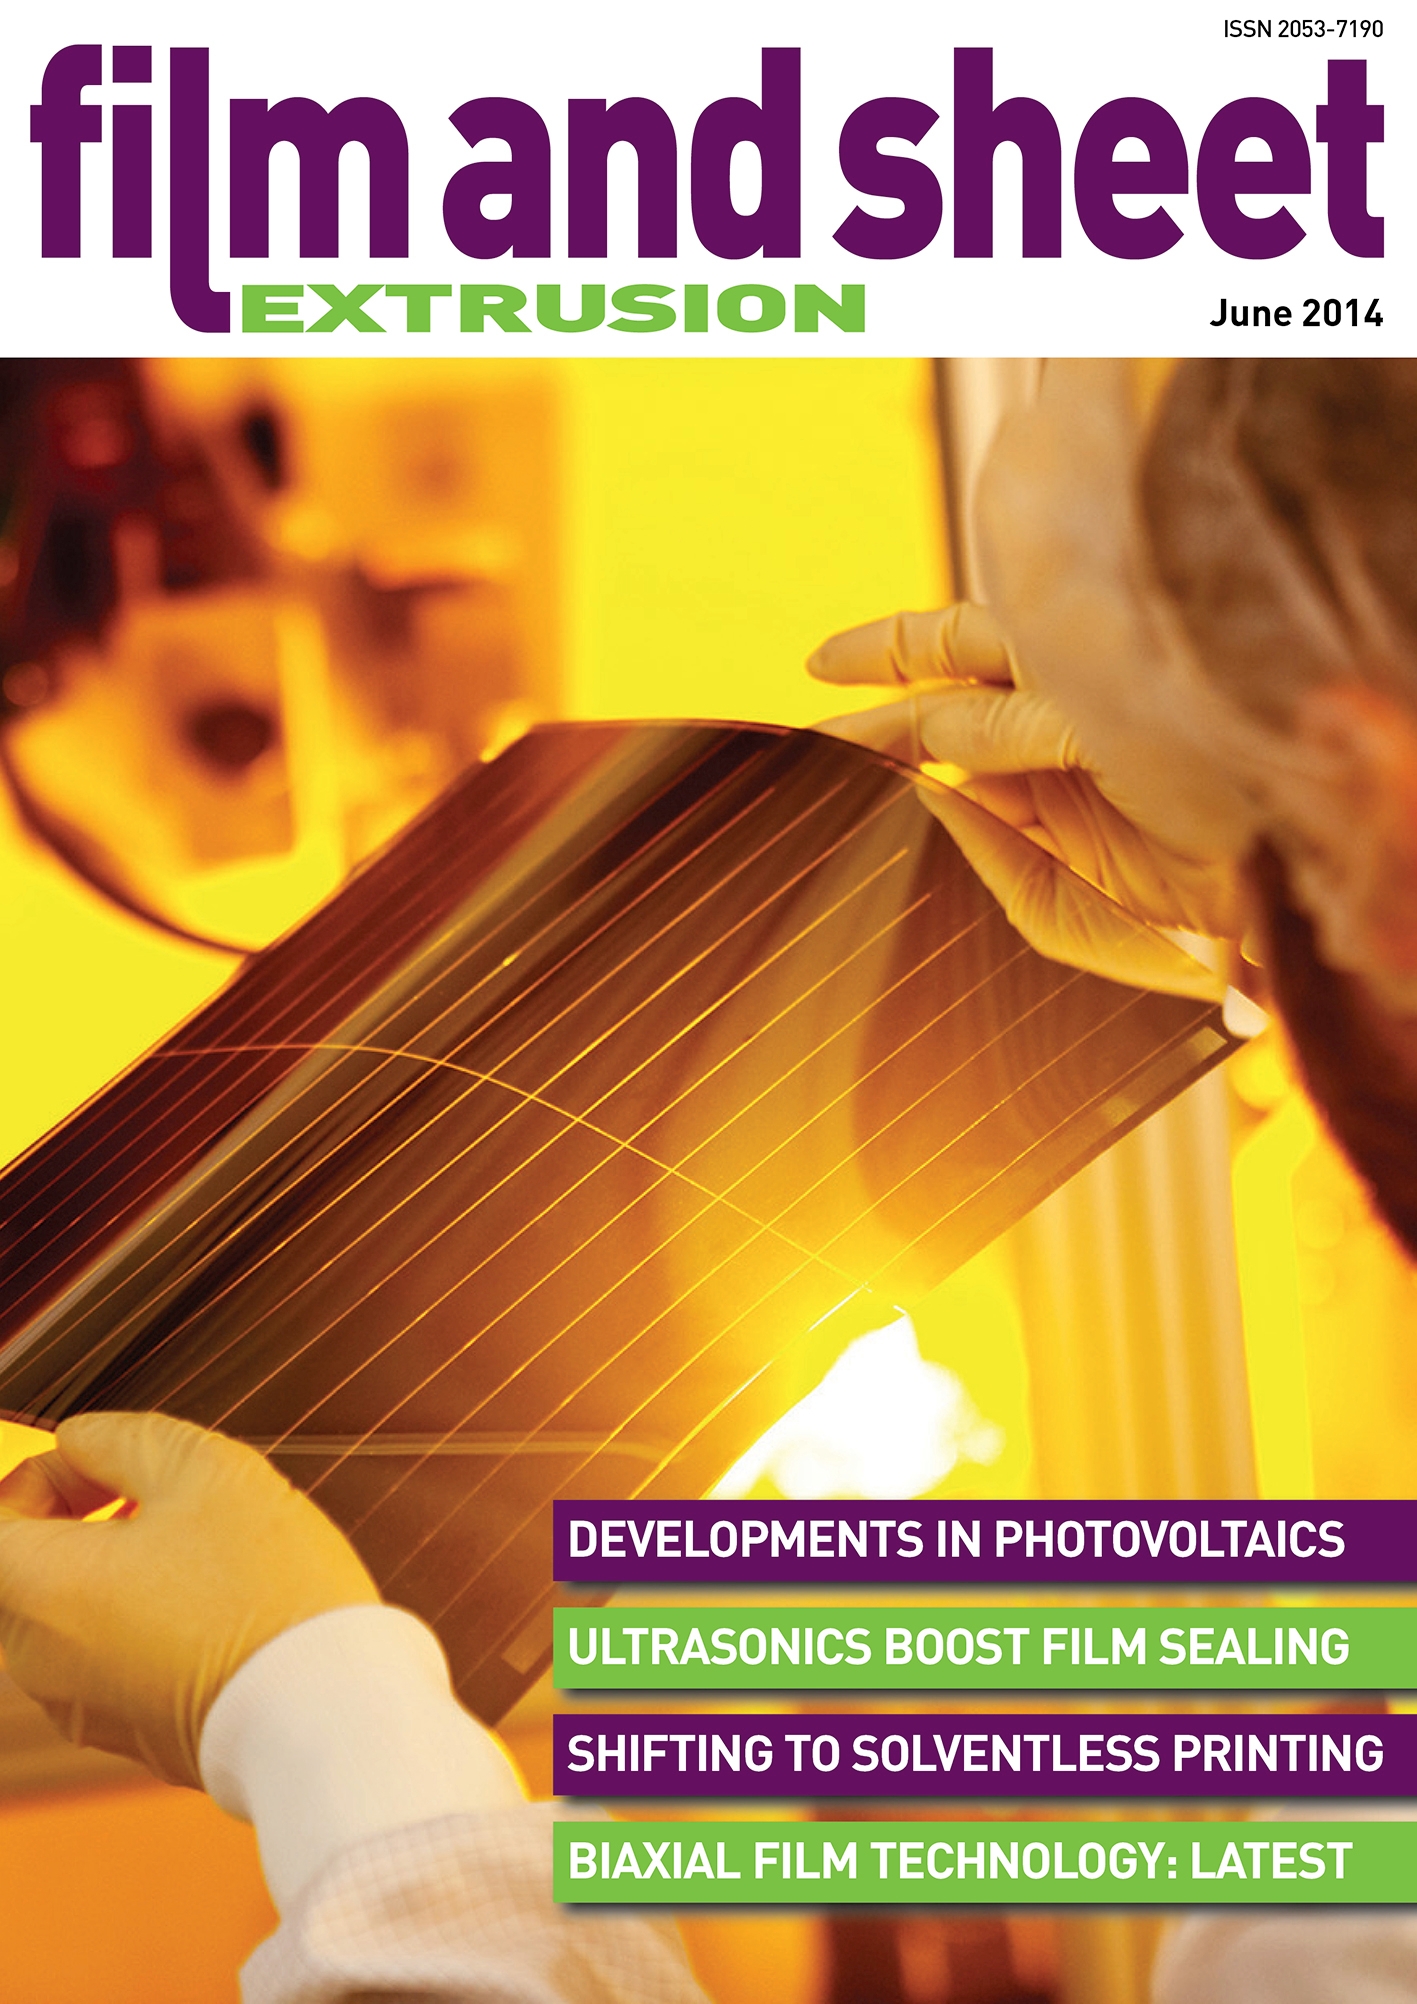 Film and Sheet Extrusion June 2014